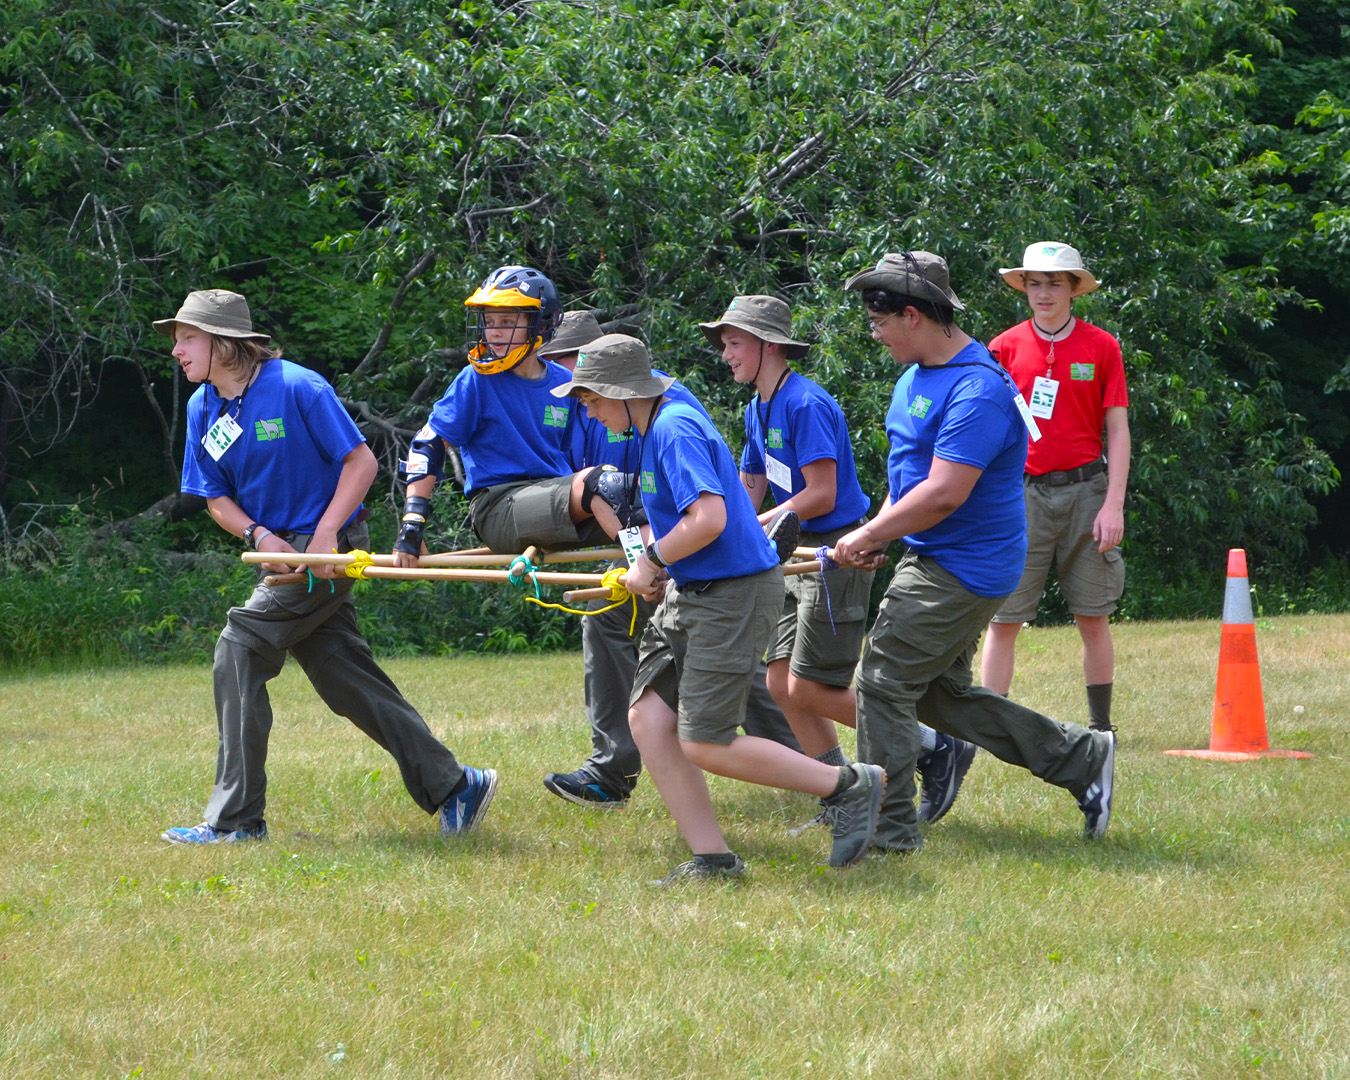 A group of 5 Scouts carry a simulated injured Scout on a hand-lashed stretcher while a staff member supervises